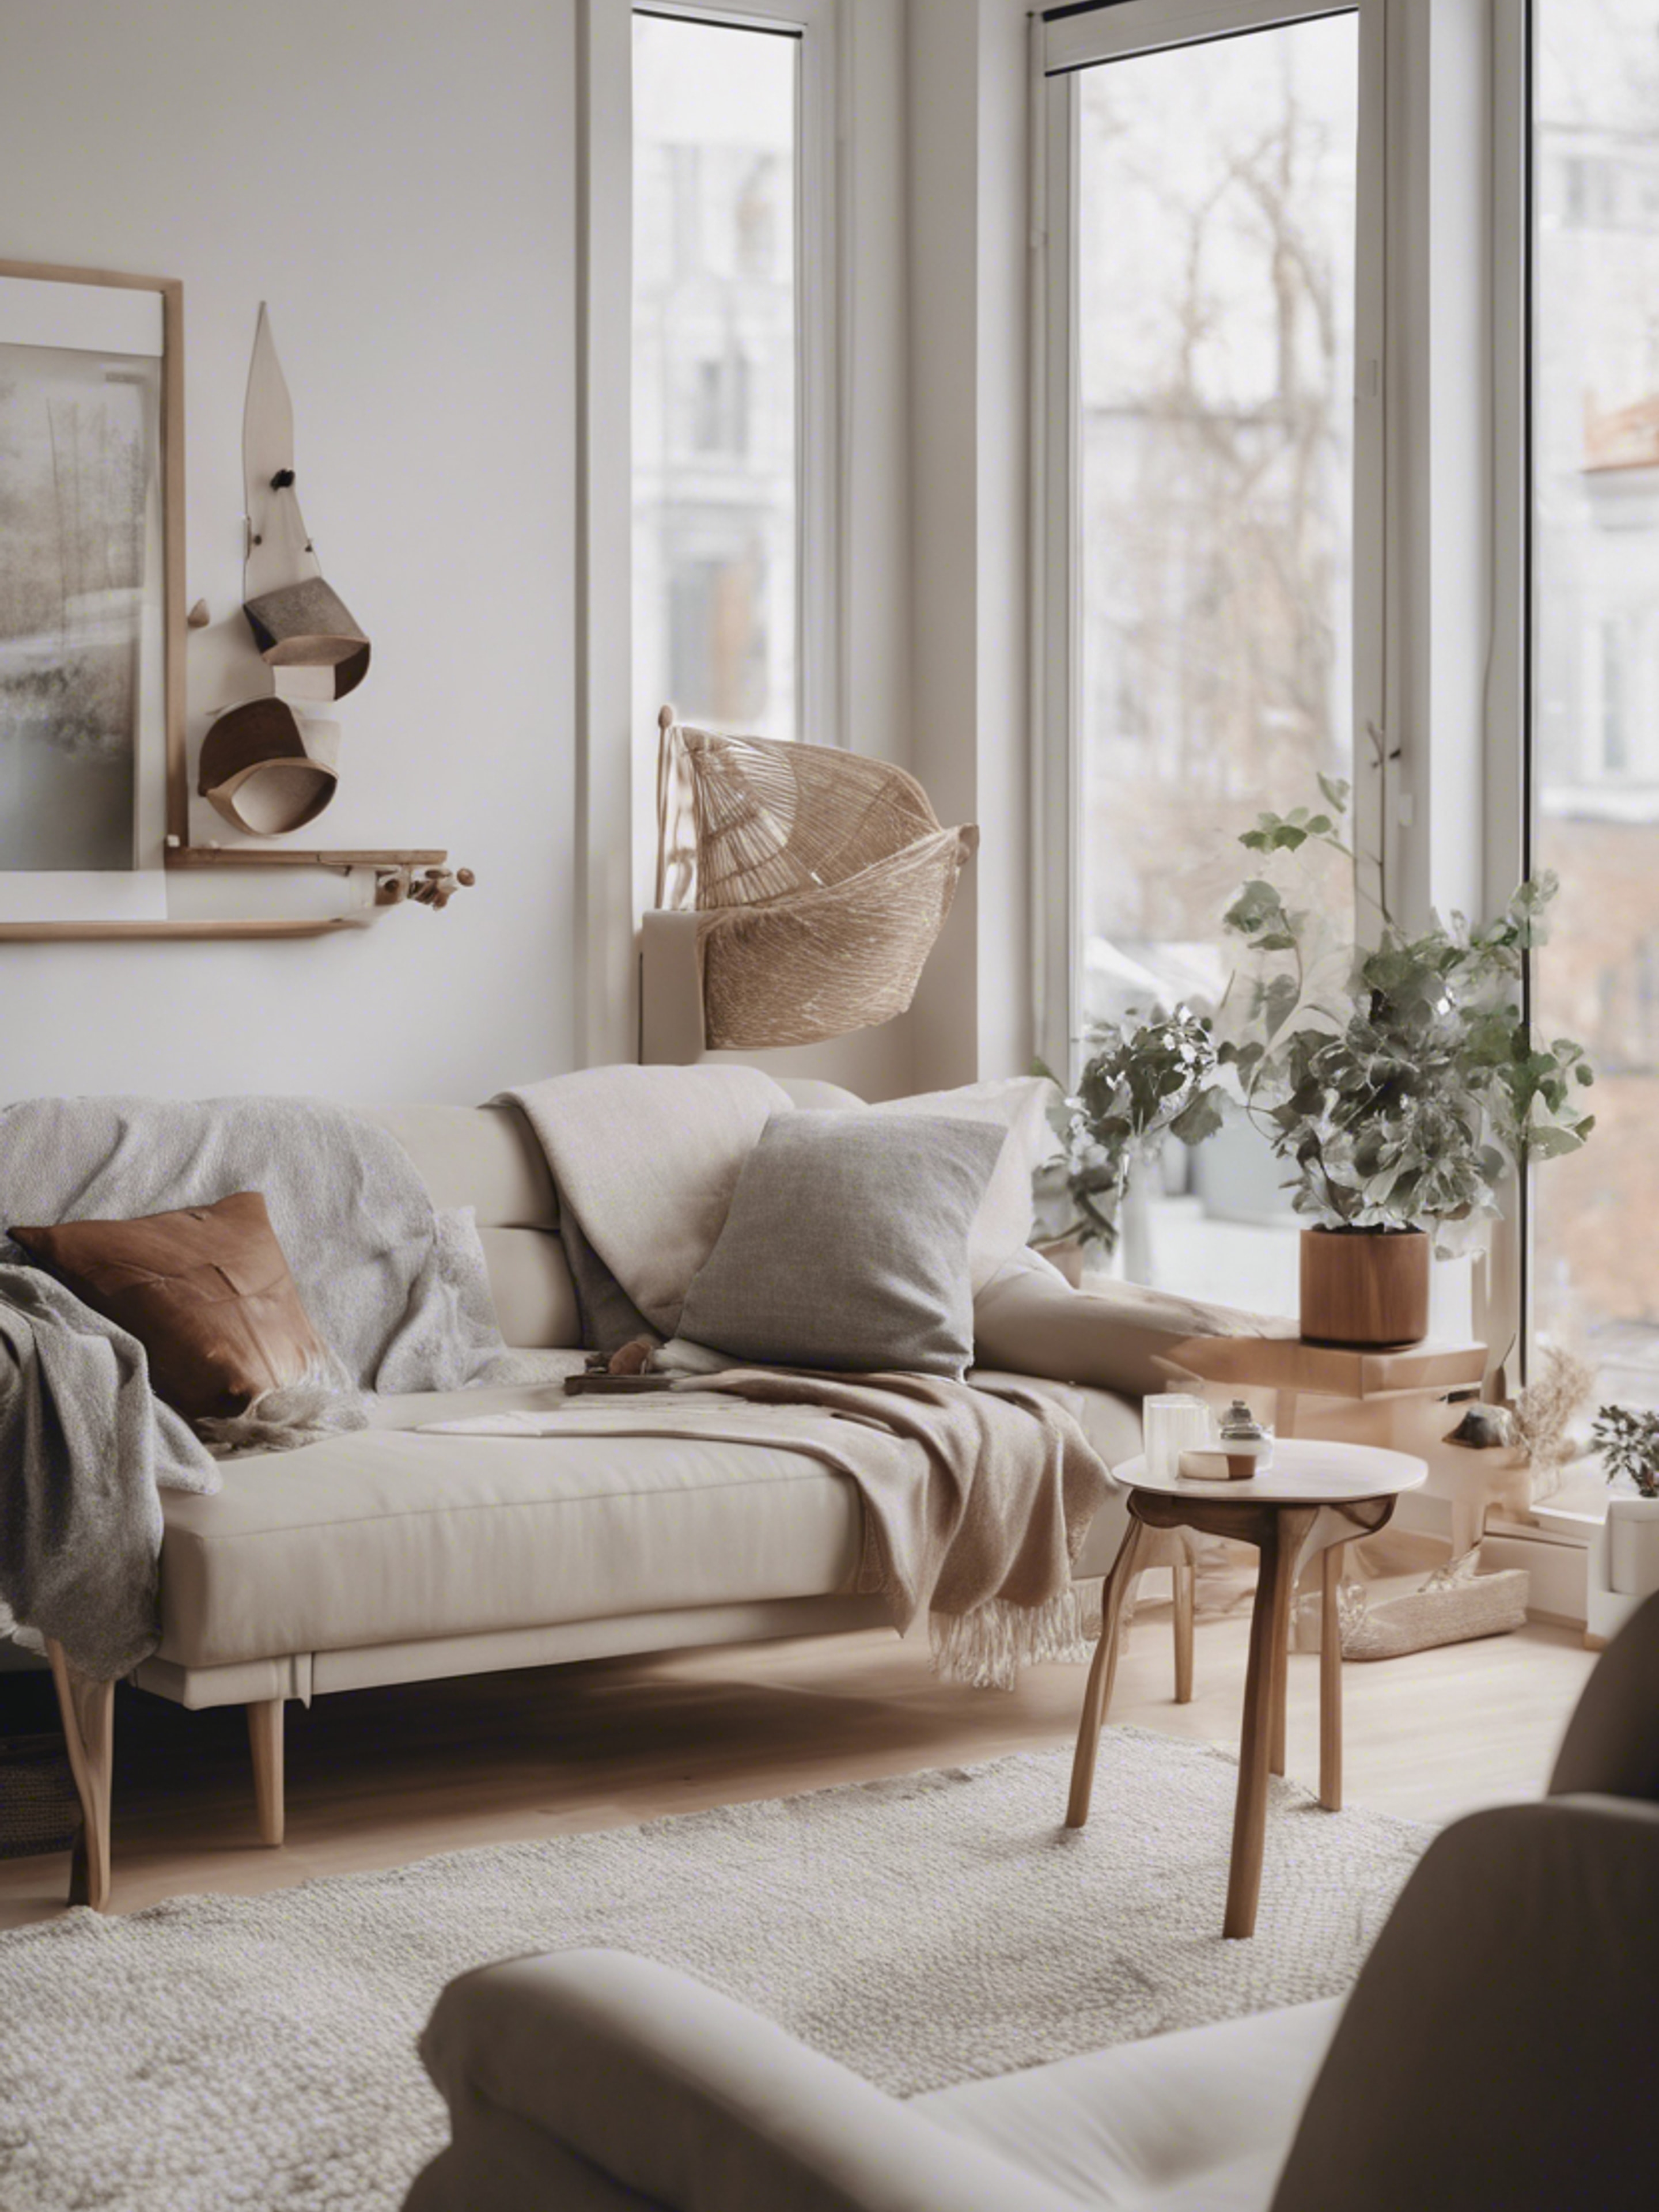 A Nordic-styled apartment with minimalist design, neutral color palette, and cozy accents. Ფონი[7cbaae500de44ae0bb2d]